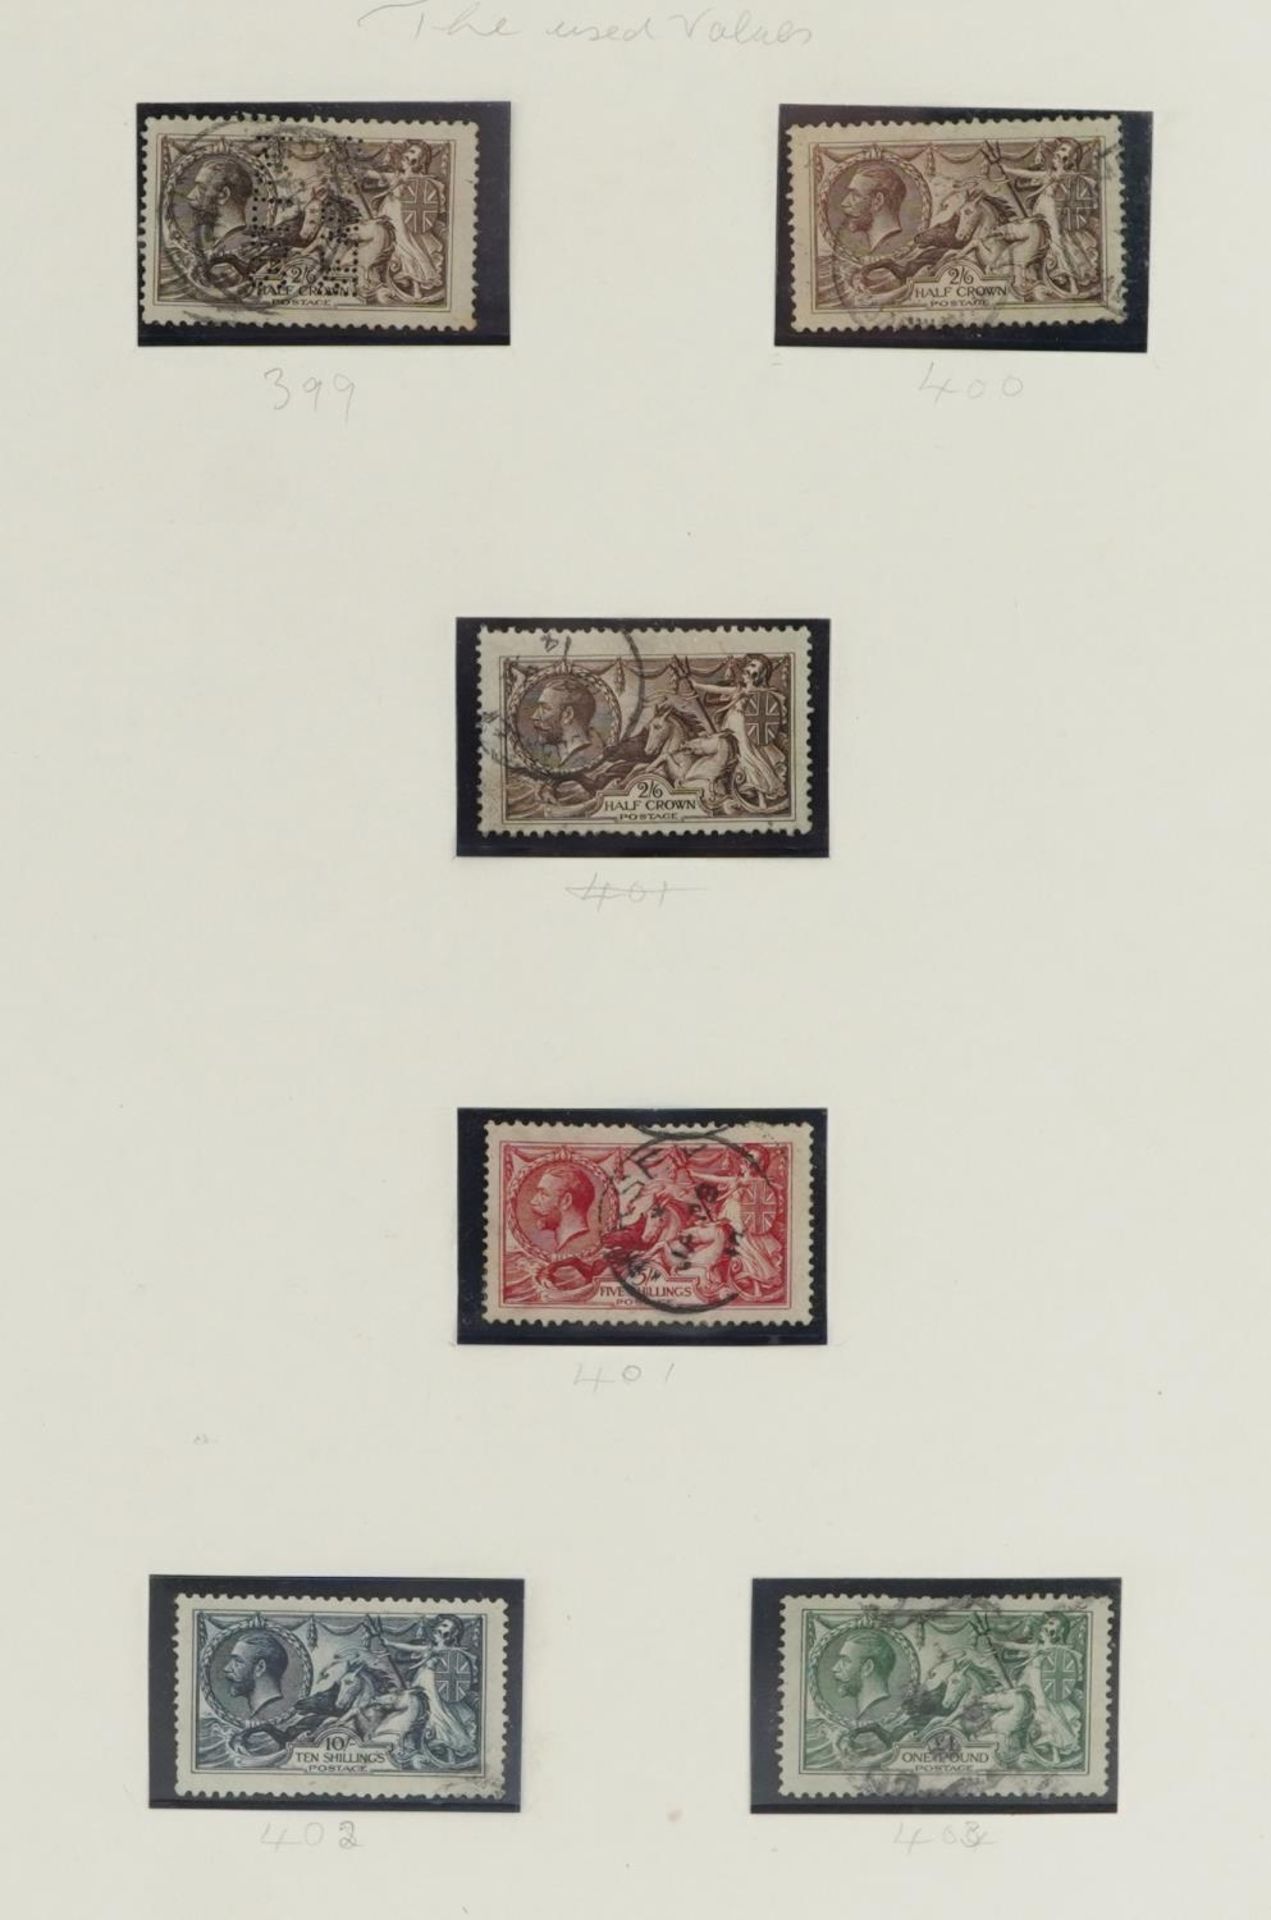 Six 1913 Seahorse stamps up to one pound : For further information on this lot please visit